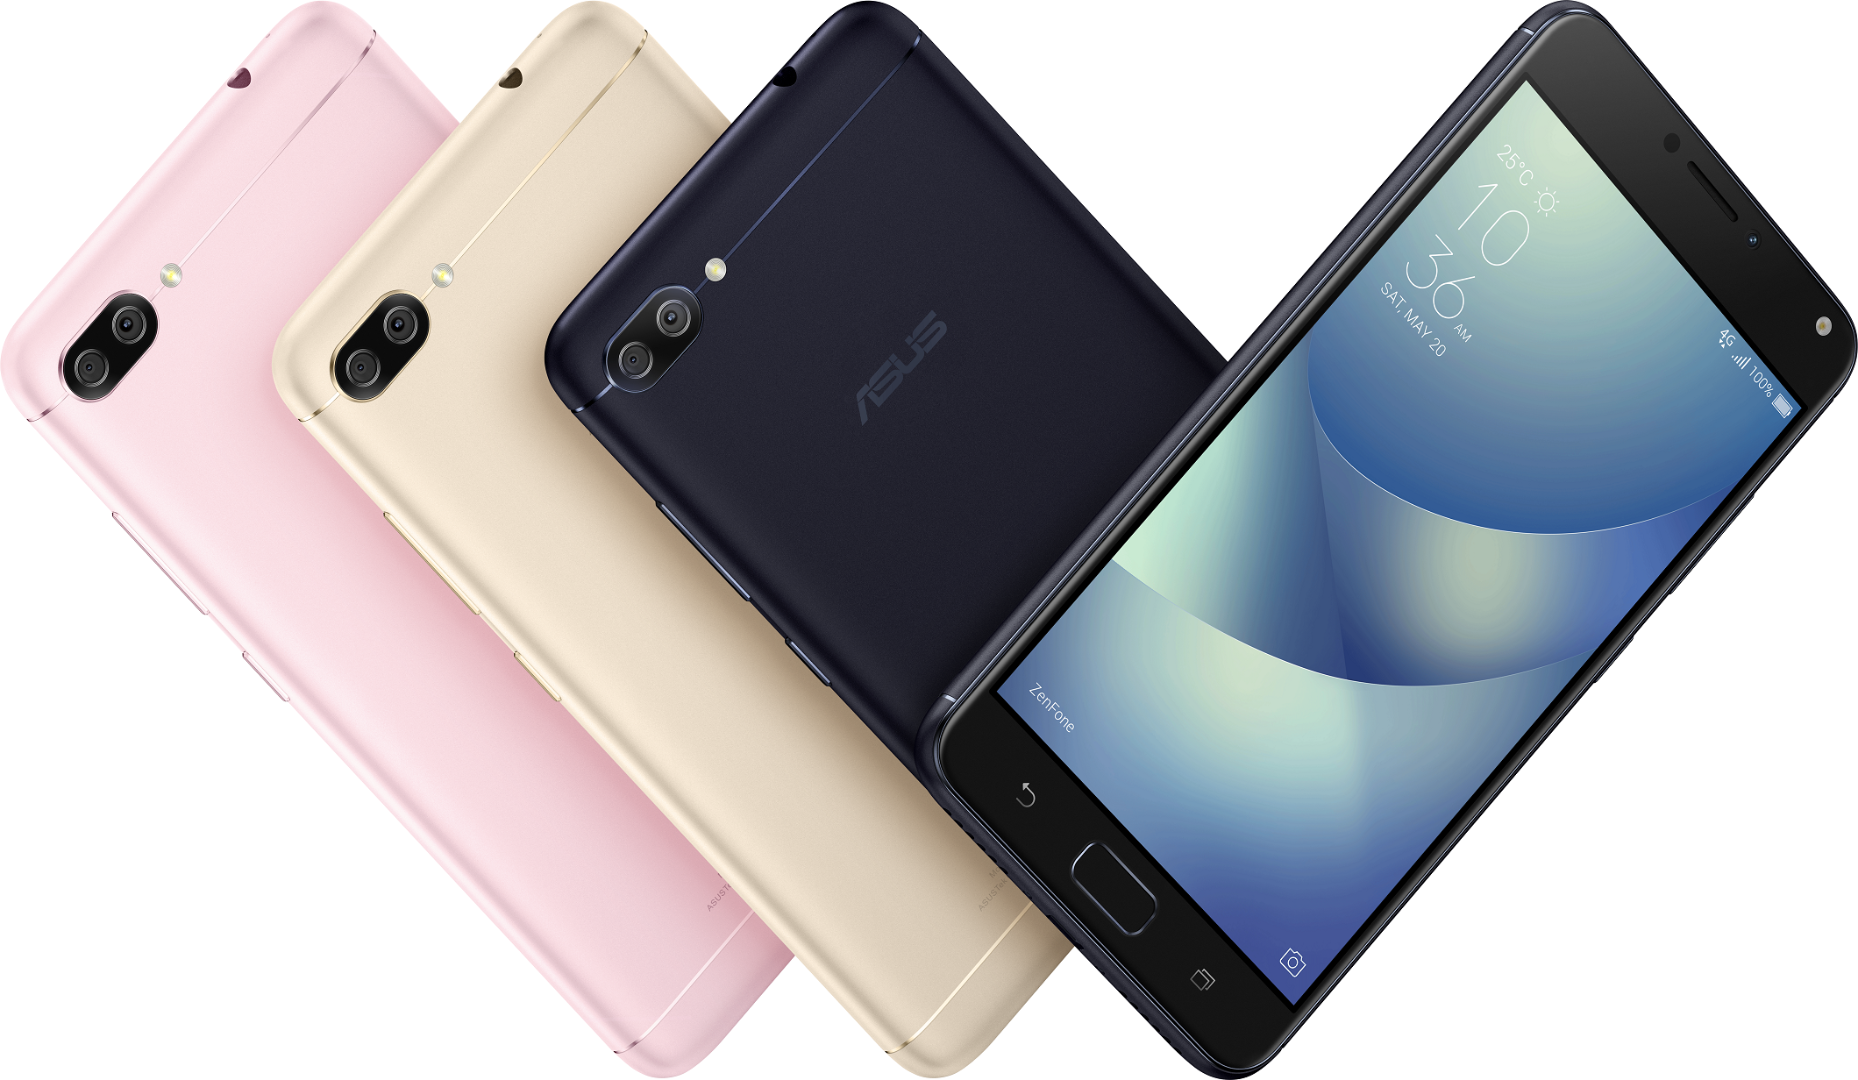 ASUS Zenfone 4 Series Smartphones - Up To 5 Different Models Launched